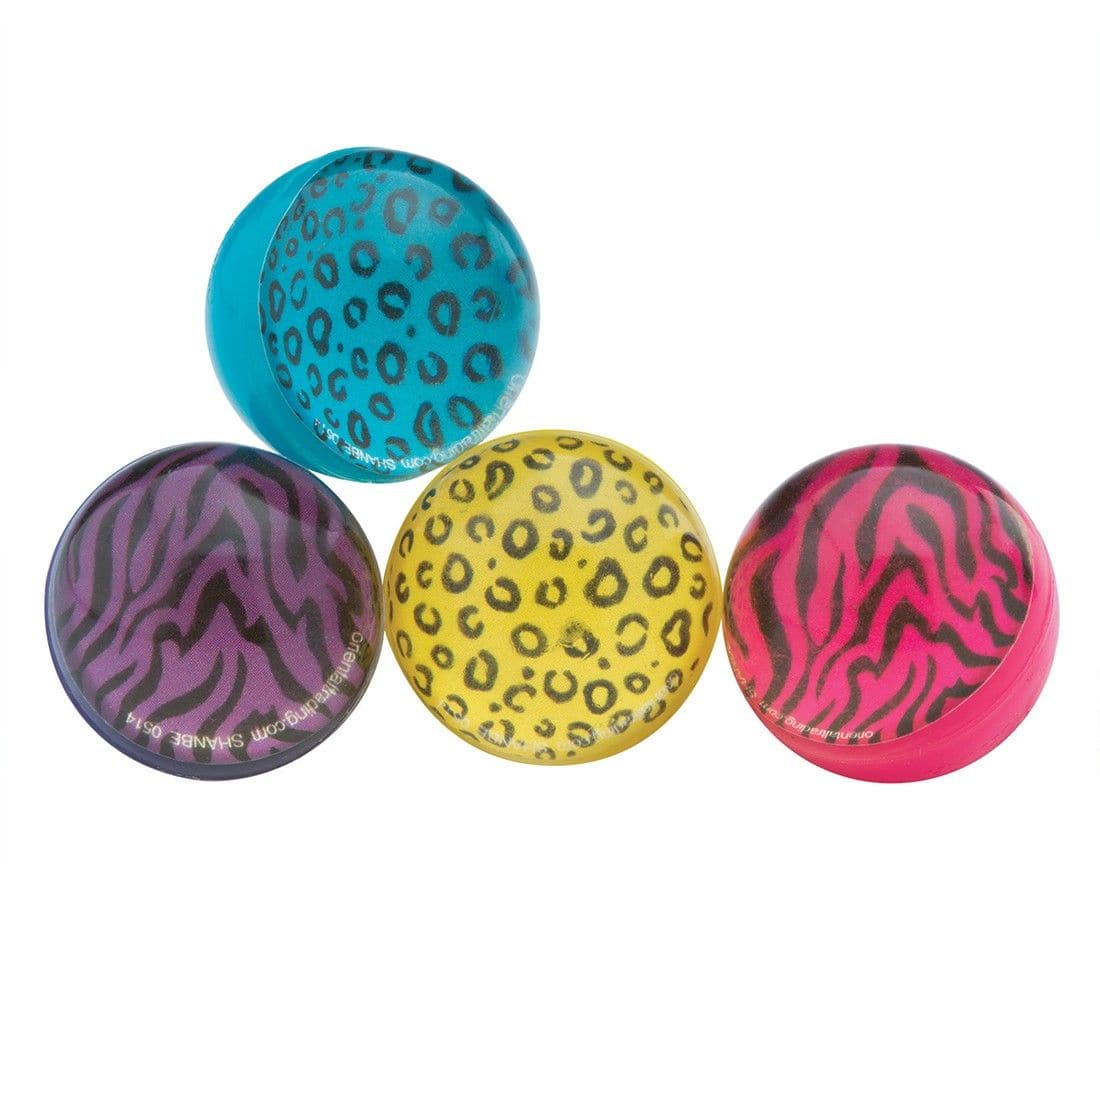 Animal Print Ball, Children will be taking a walk on the wild side when they toss around these Wild Animal Print Balls. These neon coloured bouncers with cheetah spots or zebra stripes are a lovely animal themed stress ball which children will love. Give it a roll or give it a bounce 1 Supplied at random 31mm, Animal Print Ball-Sensory Toys, Children will be taking a walk on the wild side when they toss around these Wild Animal Print Balls. These neon coloured bouncers with cheetah spots or zebra stripes ar